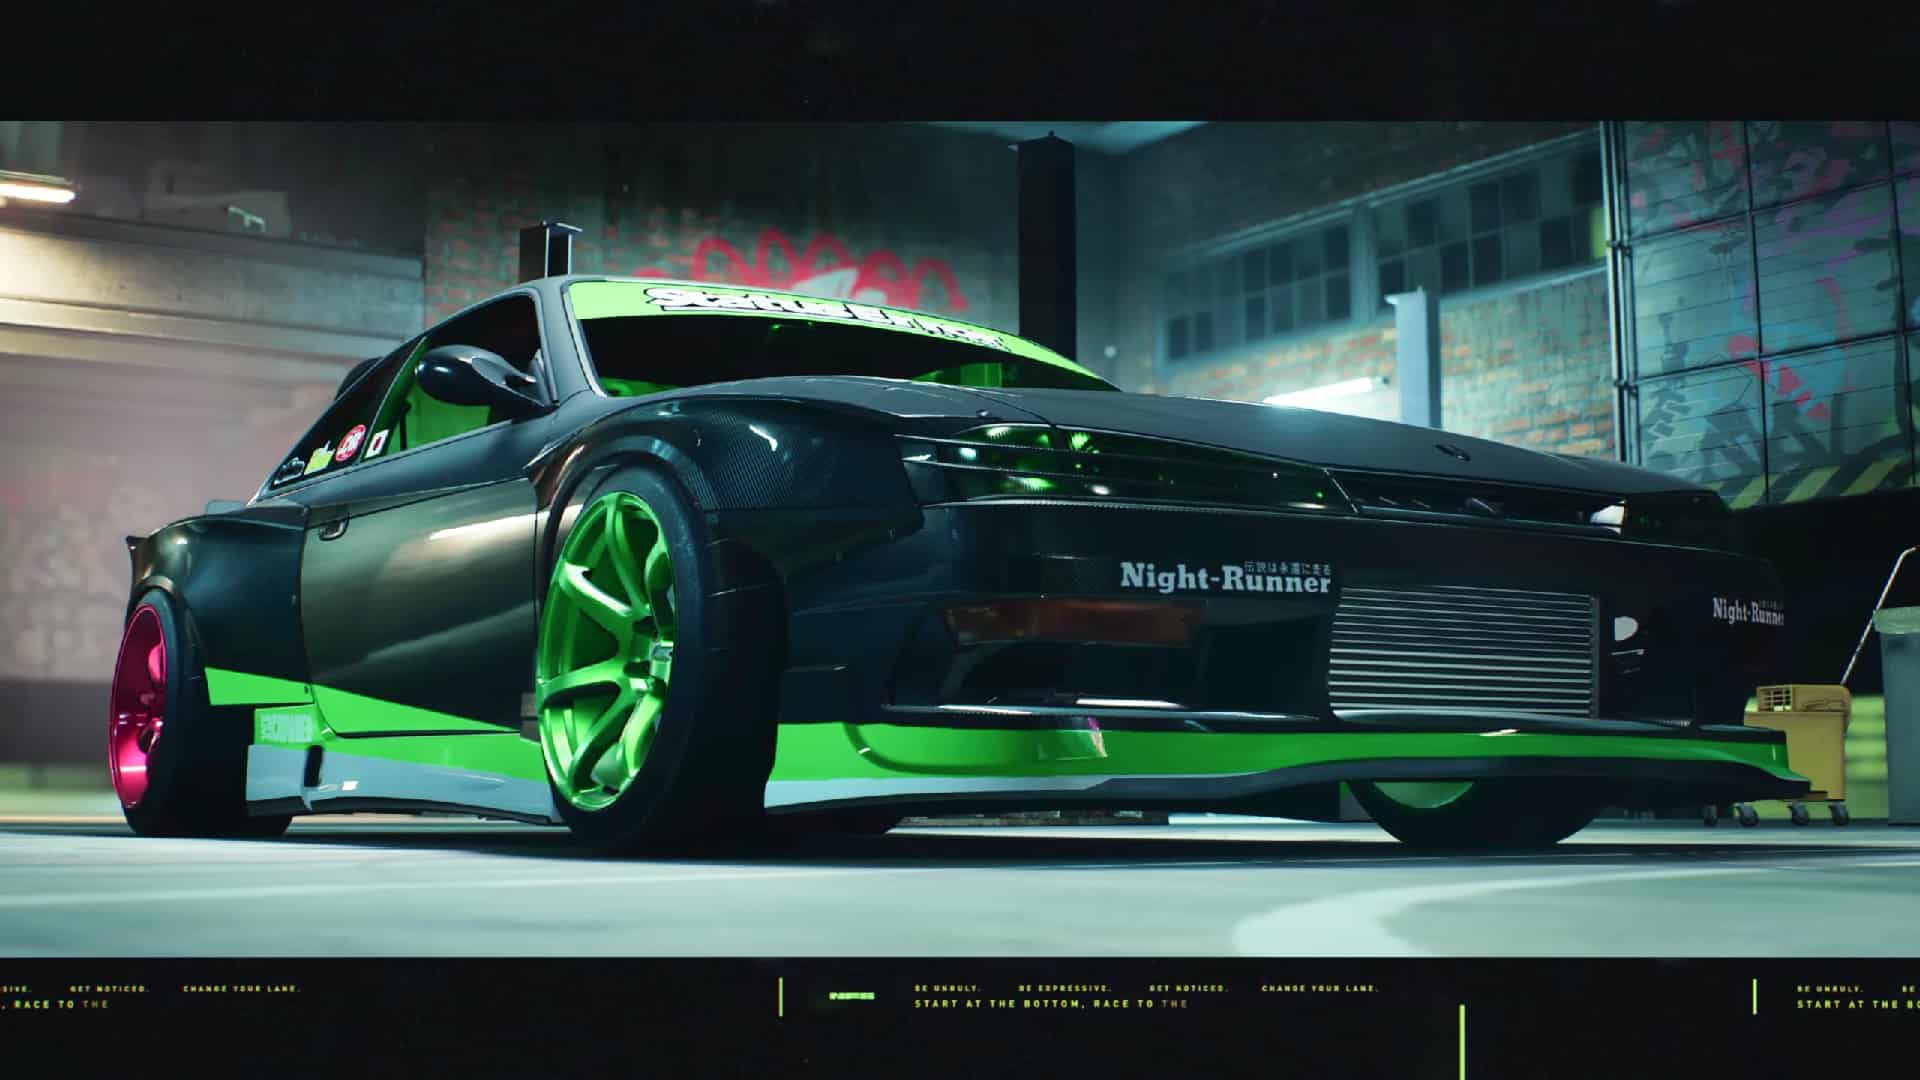 Need for Speed Unbound - Official Reveal Trailer (ft. A$AP Rocky) 